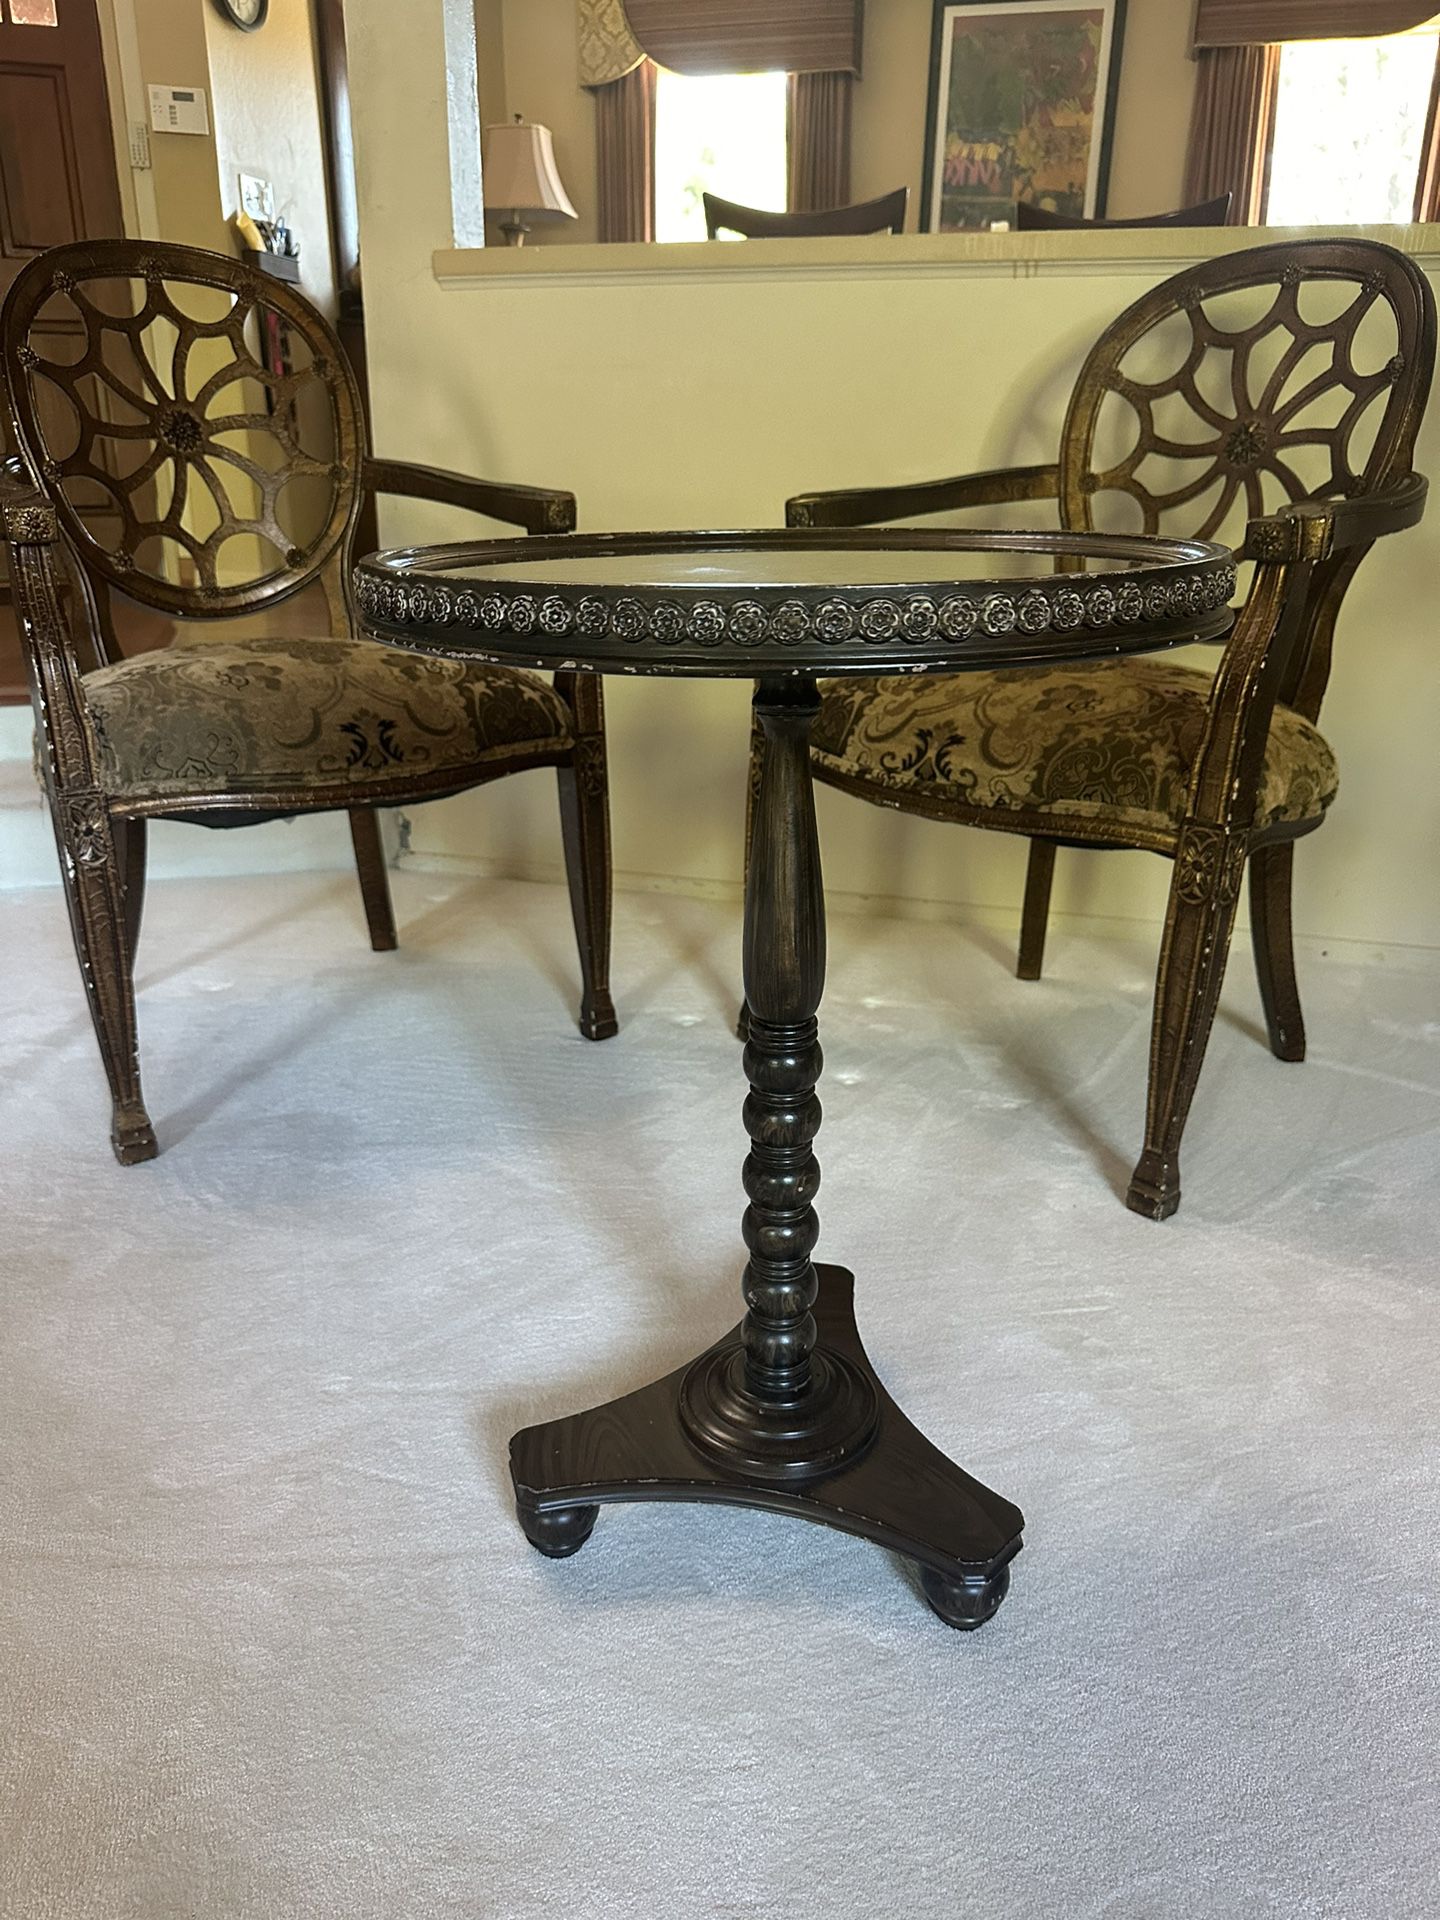 3 Piece Arm Chair And Table Set 